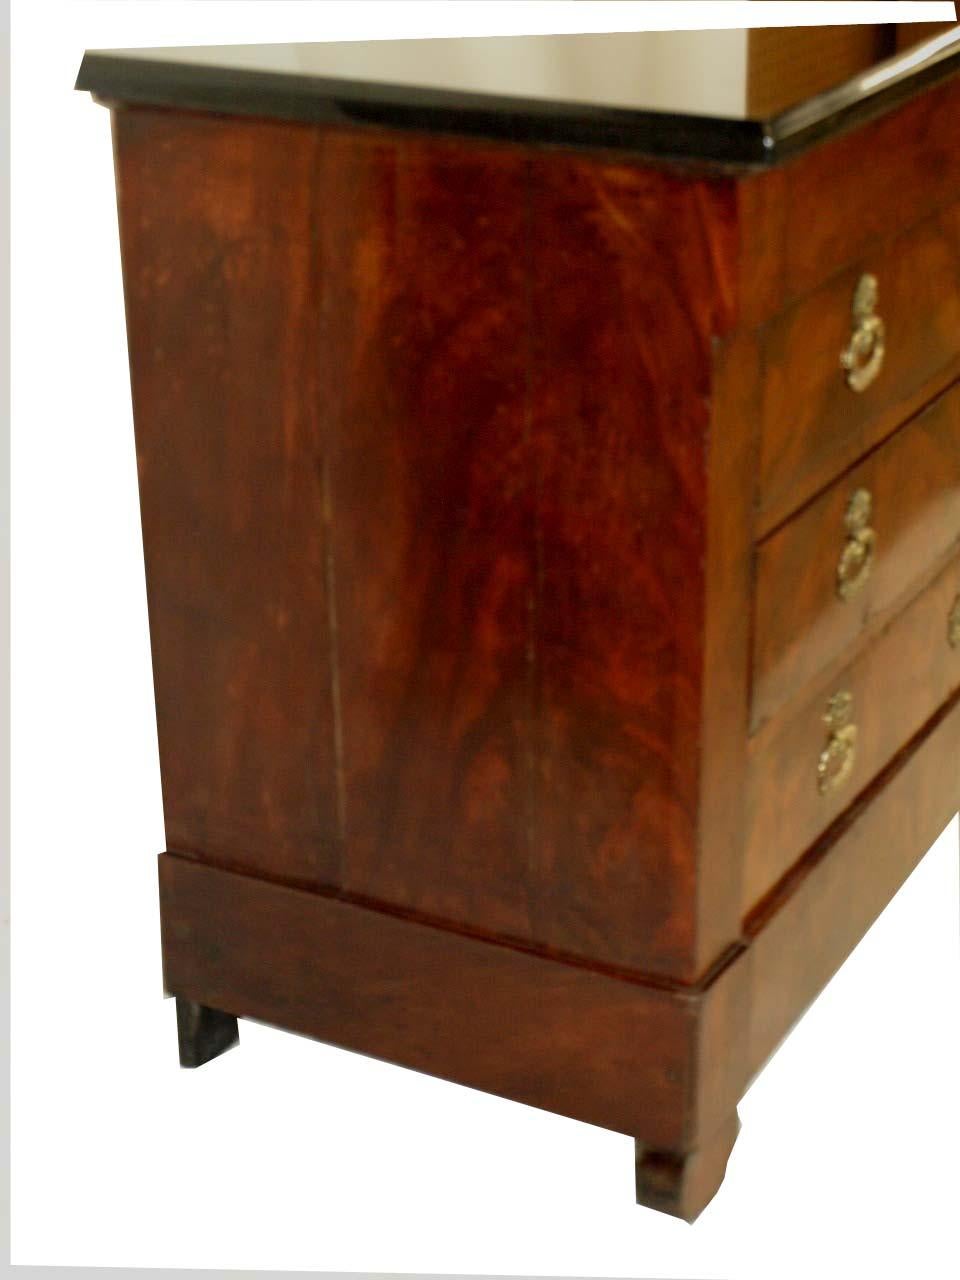 French Louis Phillipe four drawer commode with thick black granite top ( not original ) , the top drawer, as is typical, has no hardware, all drawers and sides with beautiful mahogany veneer, intricate brass pulls and escutcheons, warm color and